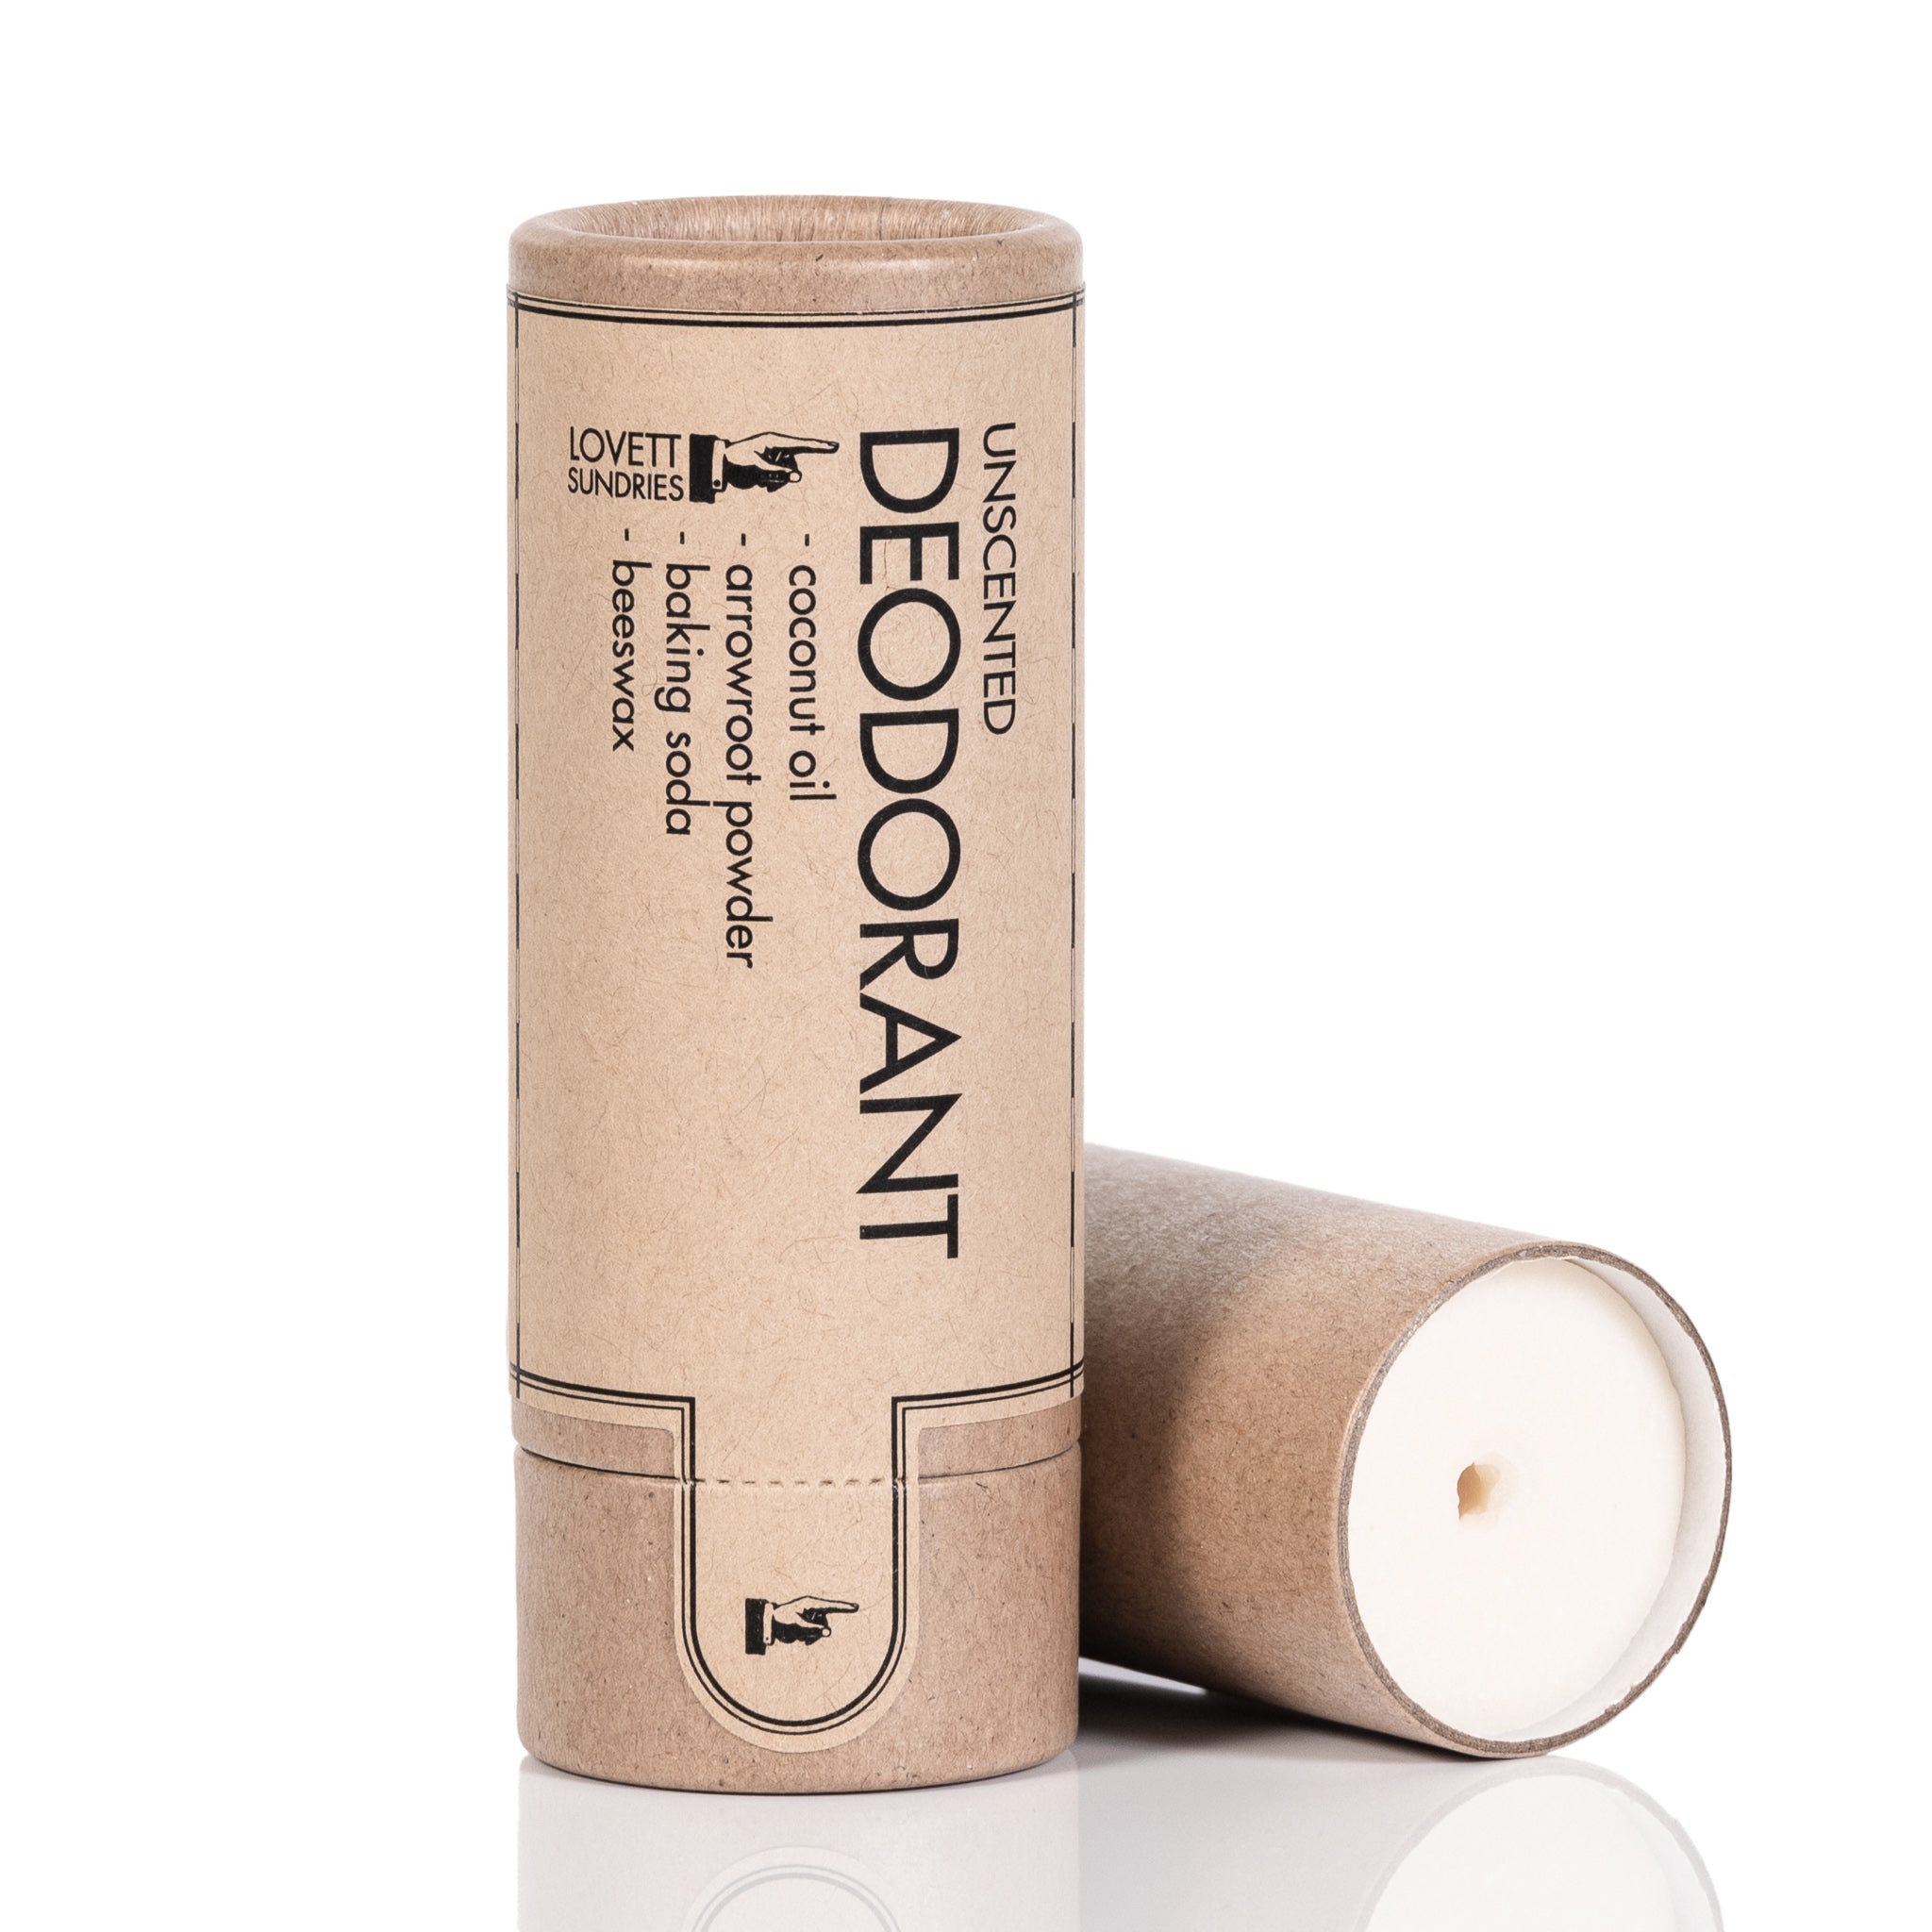 Unscented aluminum-free deodorant in a recyclable container with a white background.